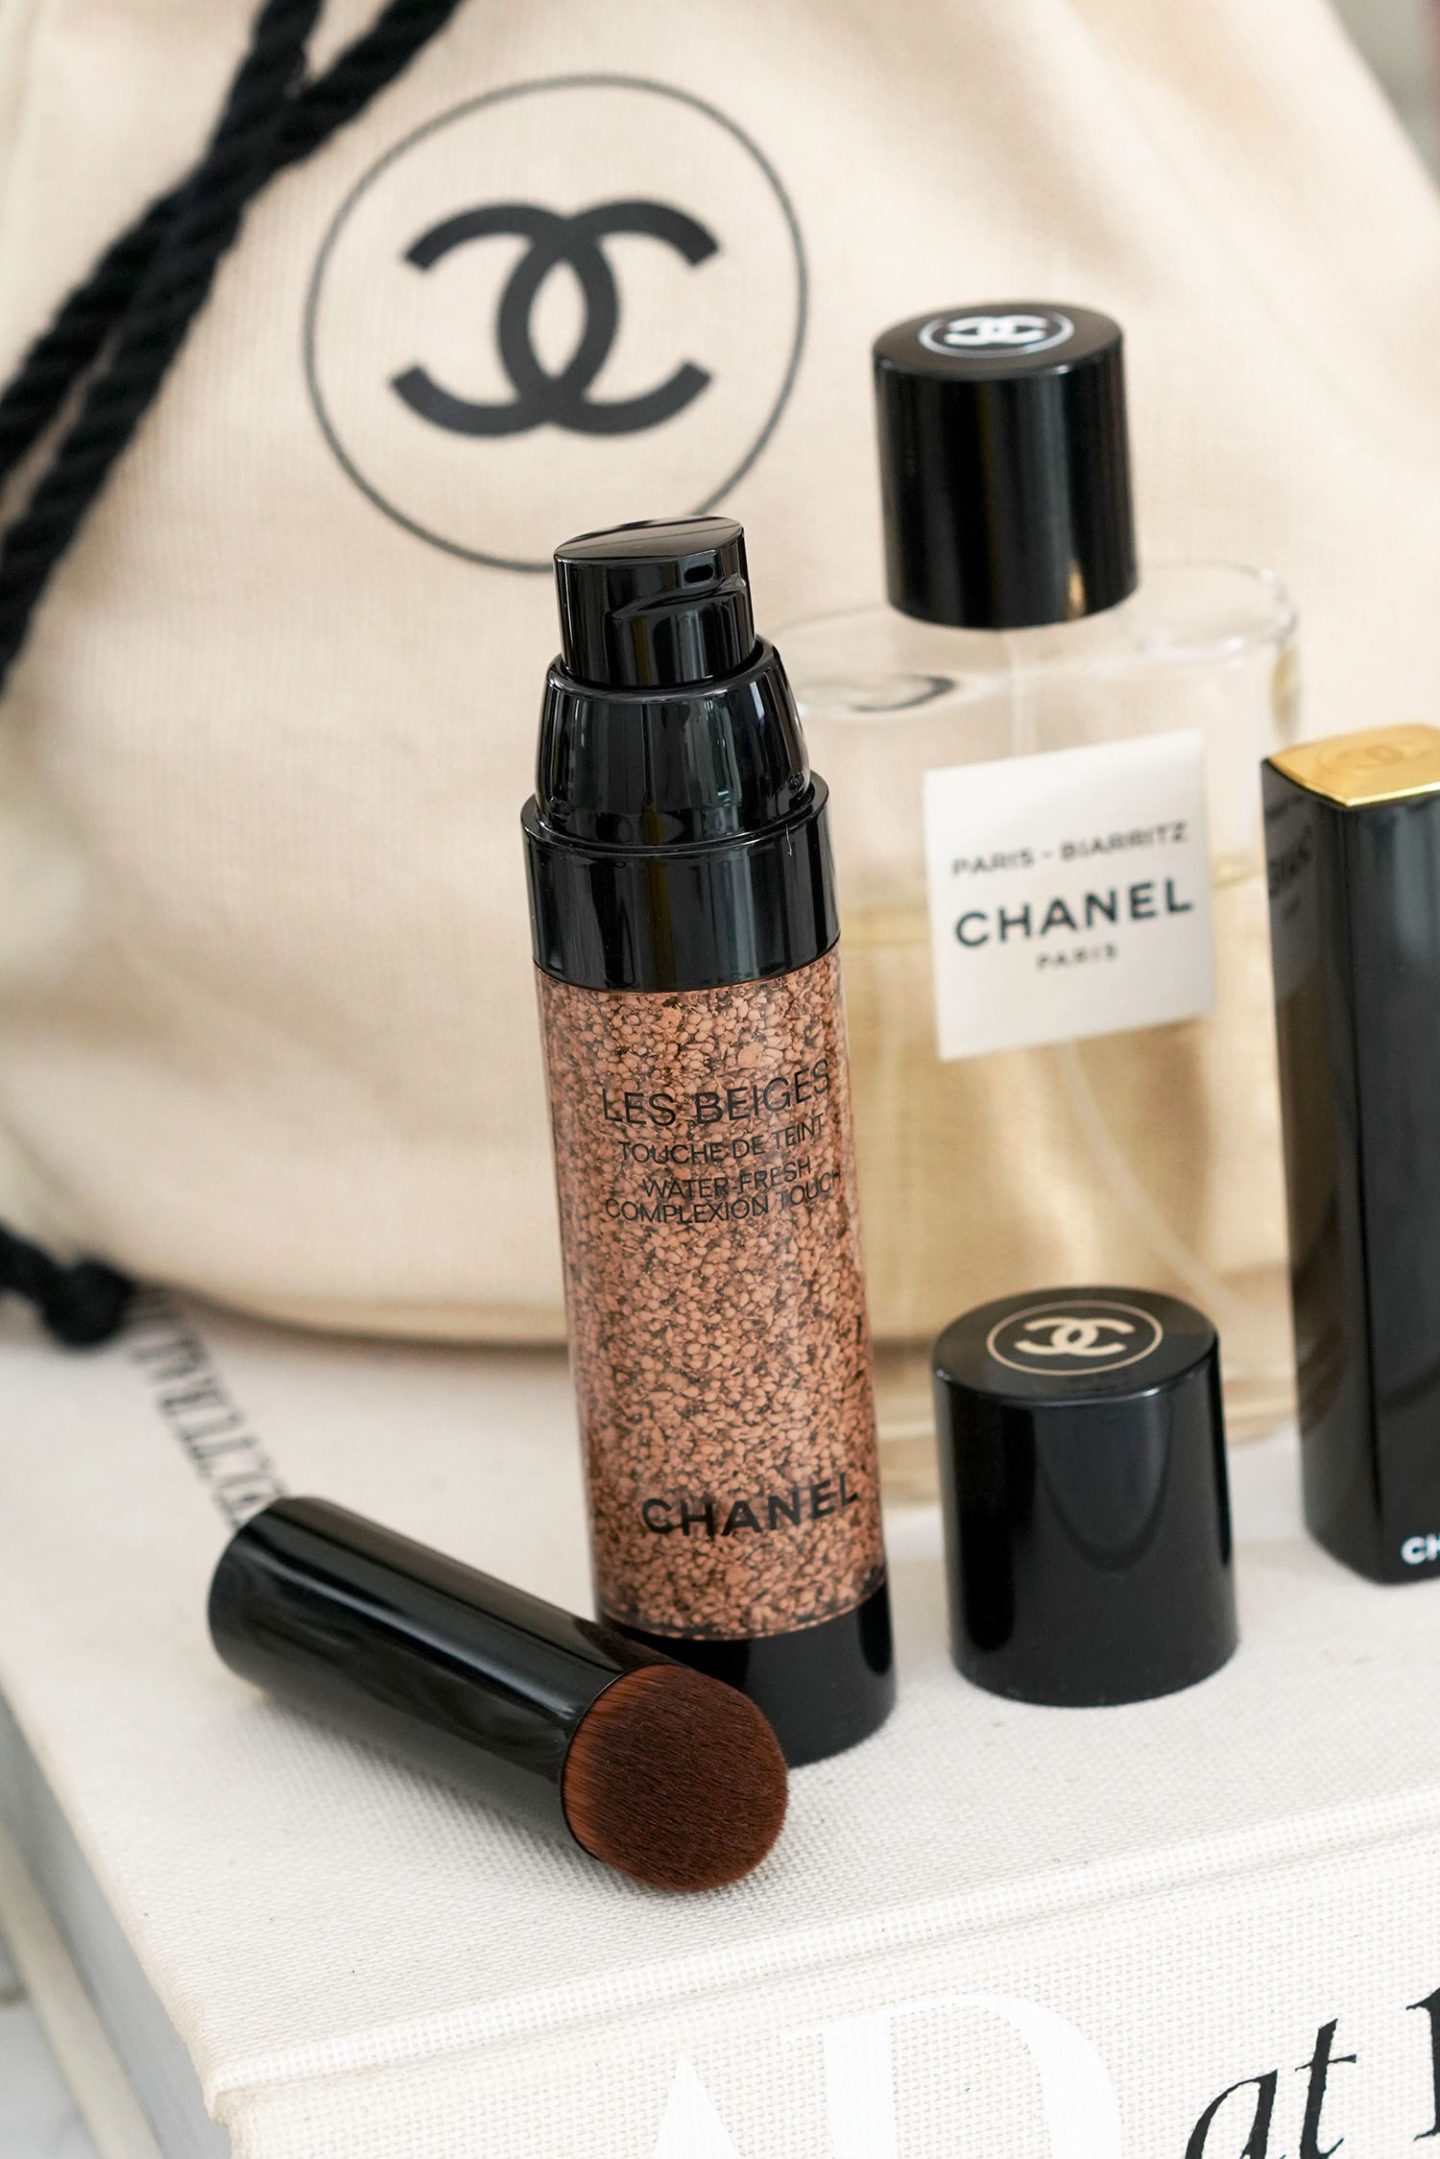 Chanel Les Beiges Water-Fresh Complexion Tint